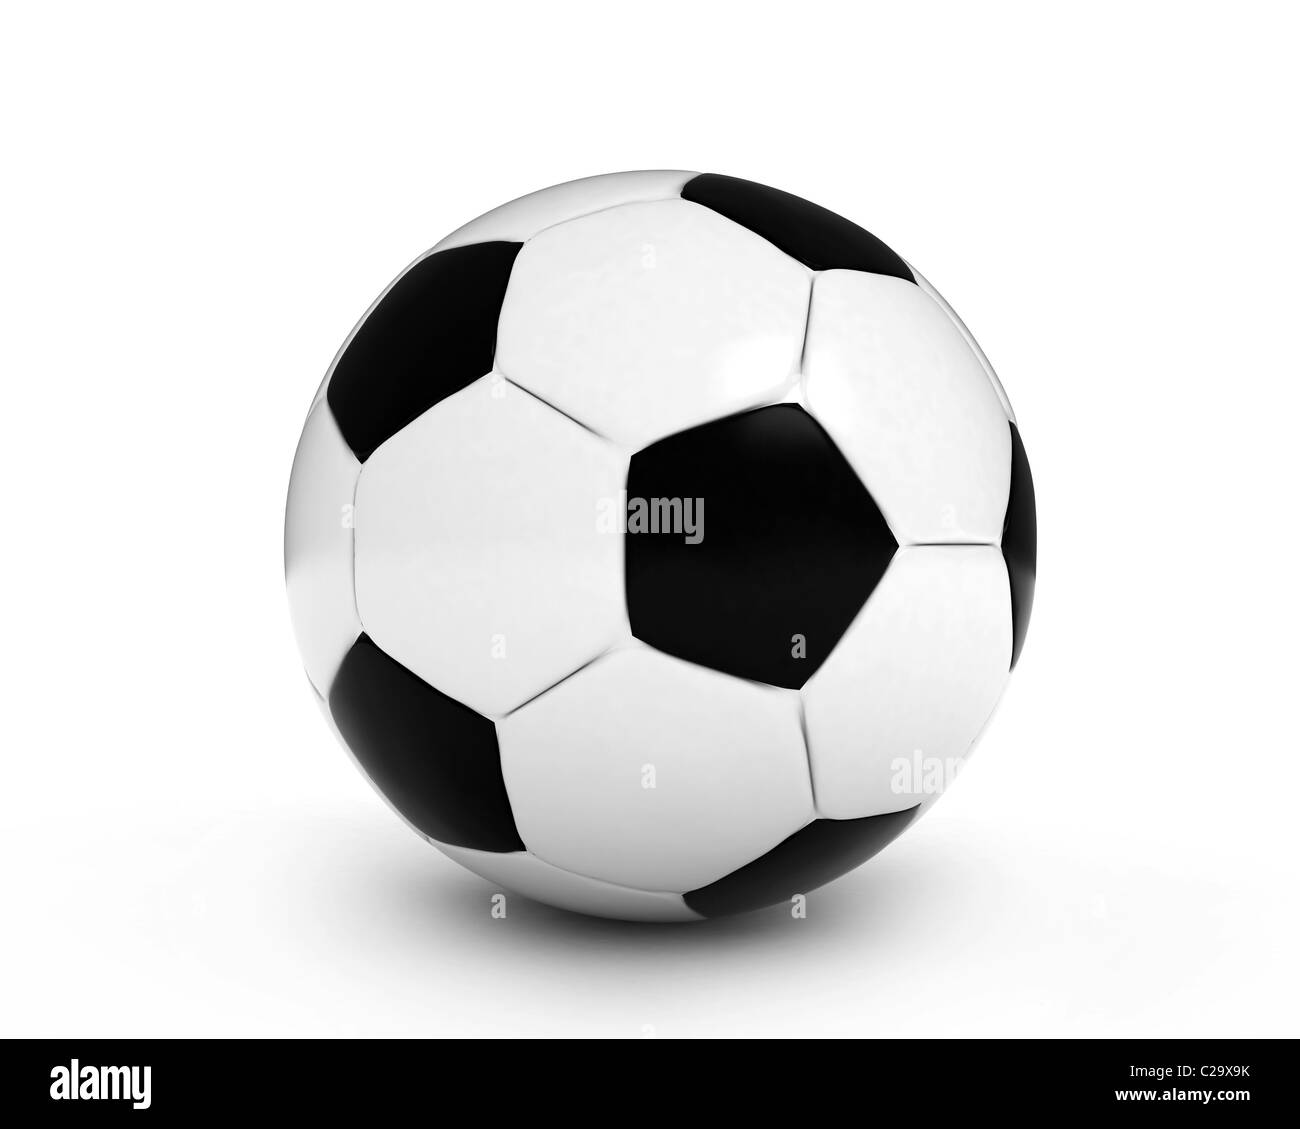 3D Illustration of a Soccer Ball Stock Photo